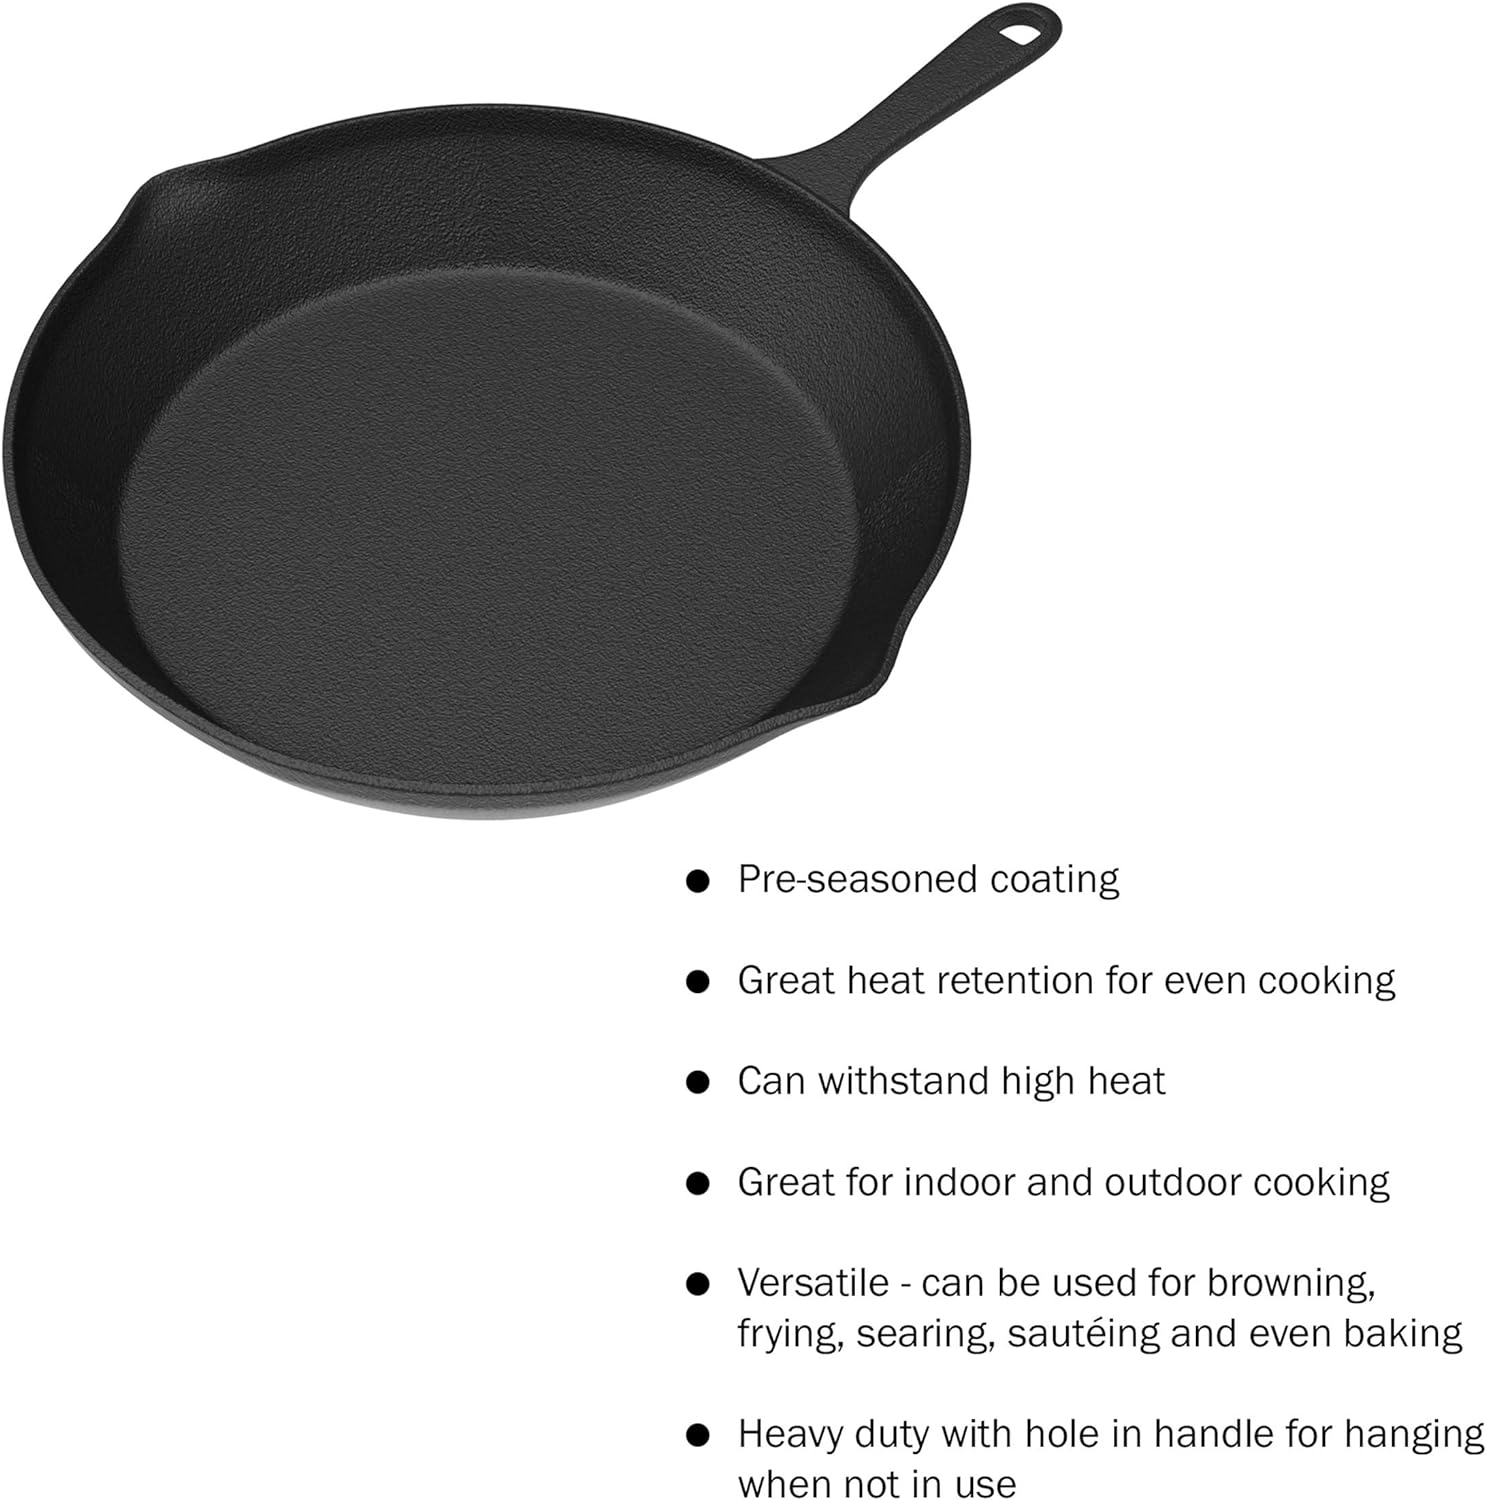 Pre Seasoned Cast Iron Skillets - 3 Pan Set - 9 inches, 8 inches, 6 inches - 1.5 to 2 inches deep - Durable with Strong Handle - Great for both veggies and meat - image 3 of 7